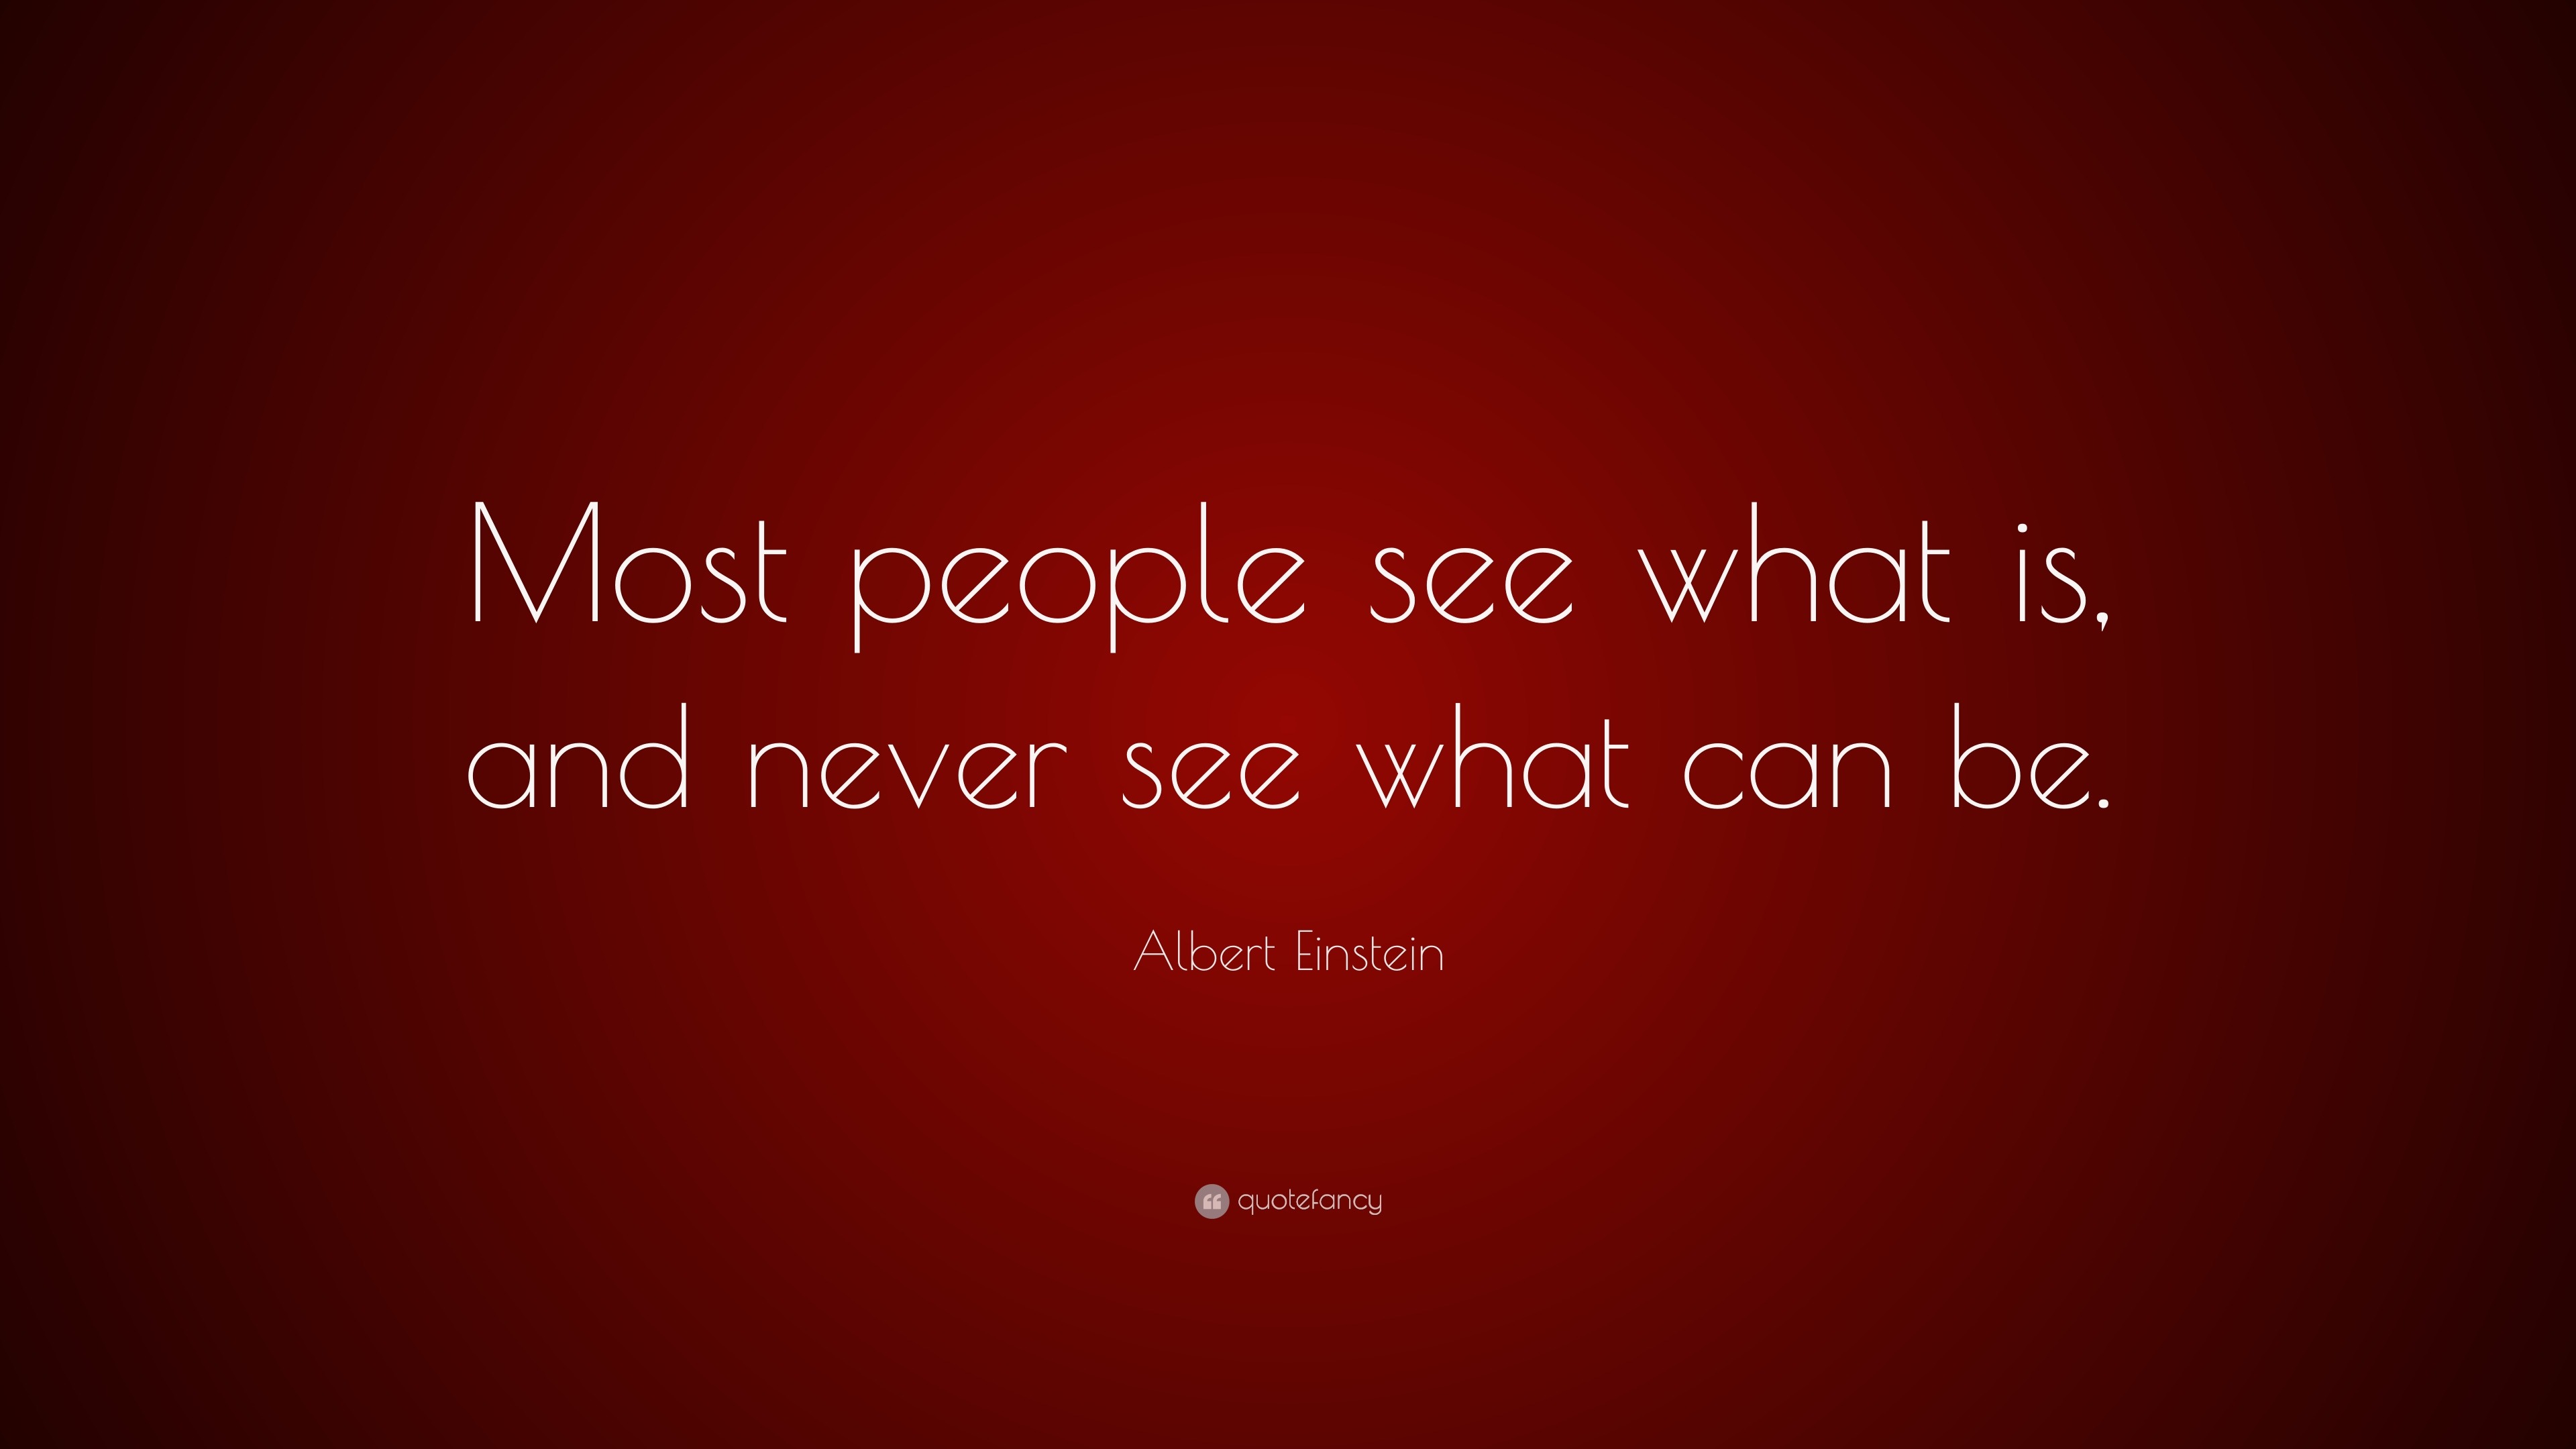 Albert Einstein Quote: “Most people see what is, and never see what can ...